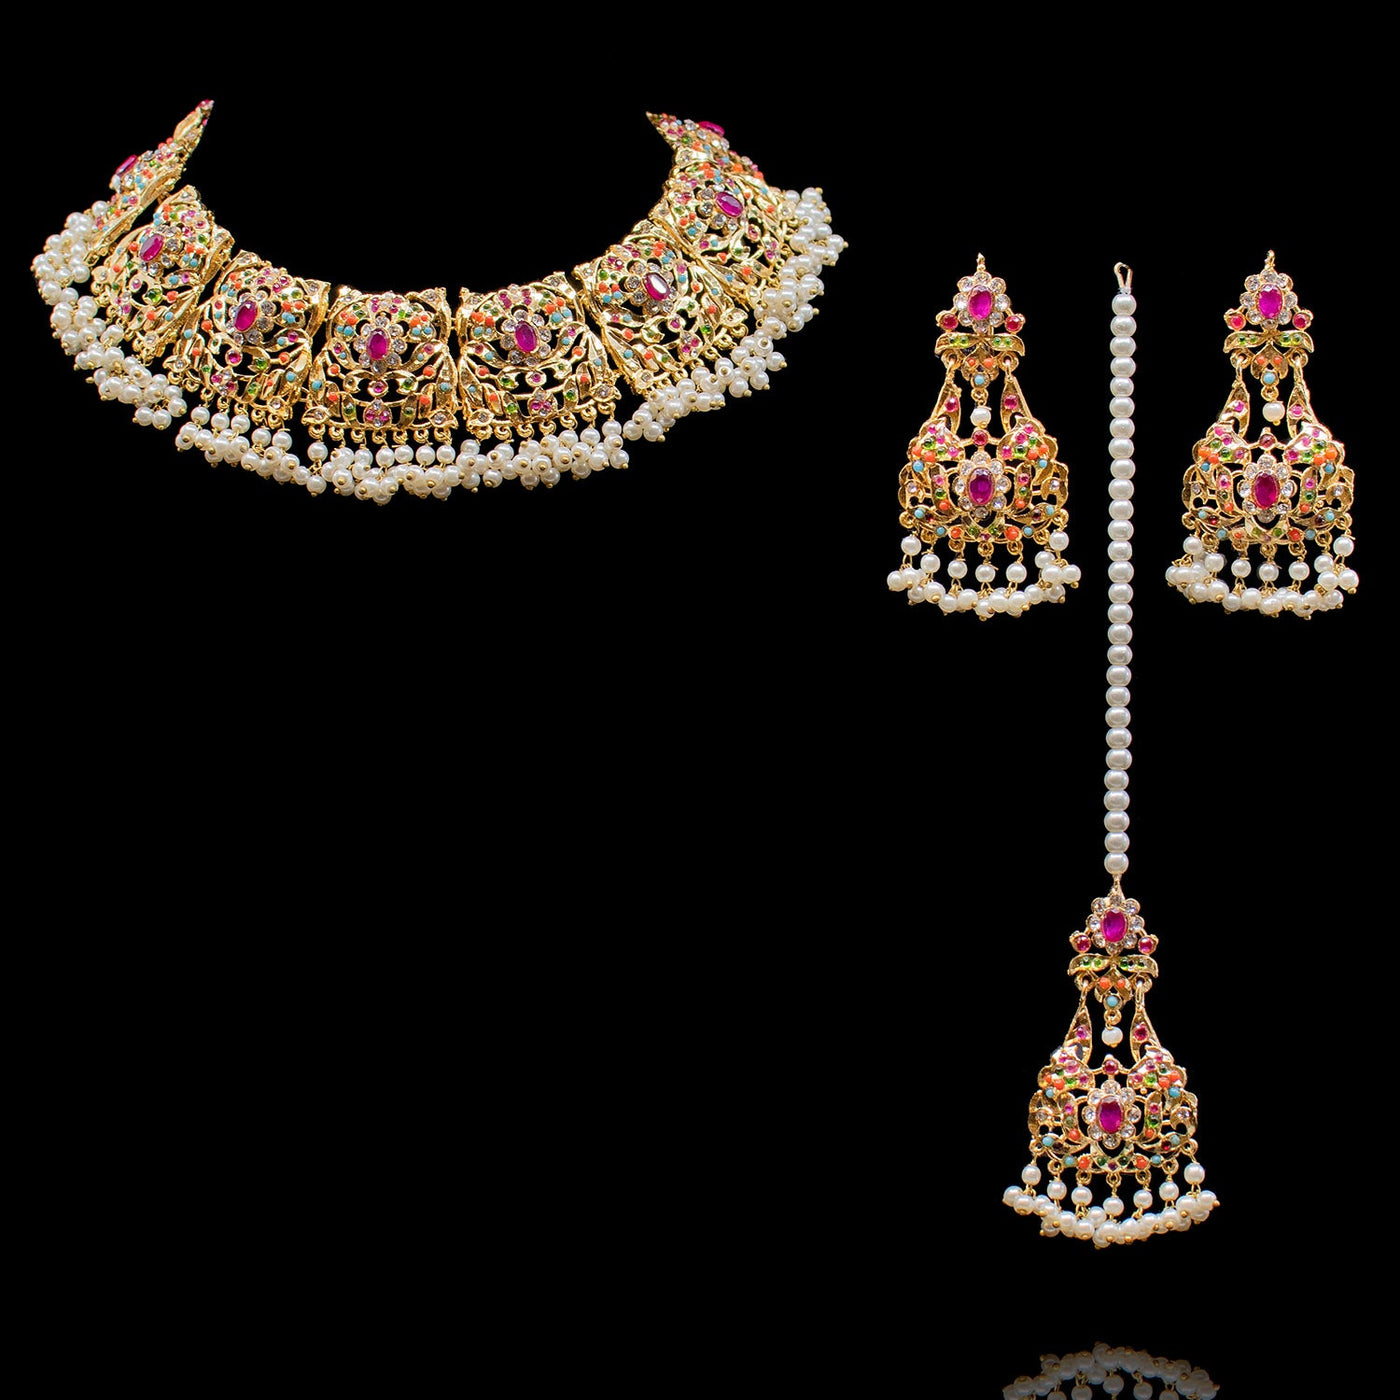 Nitya Set - Available in 2 Options